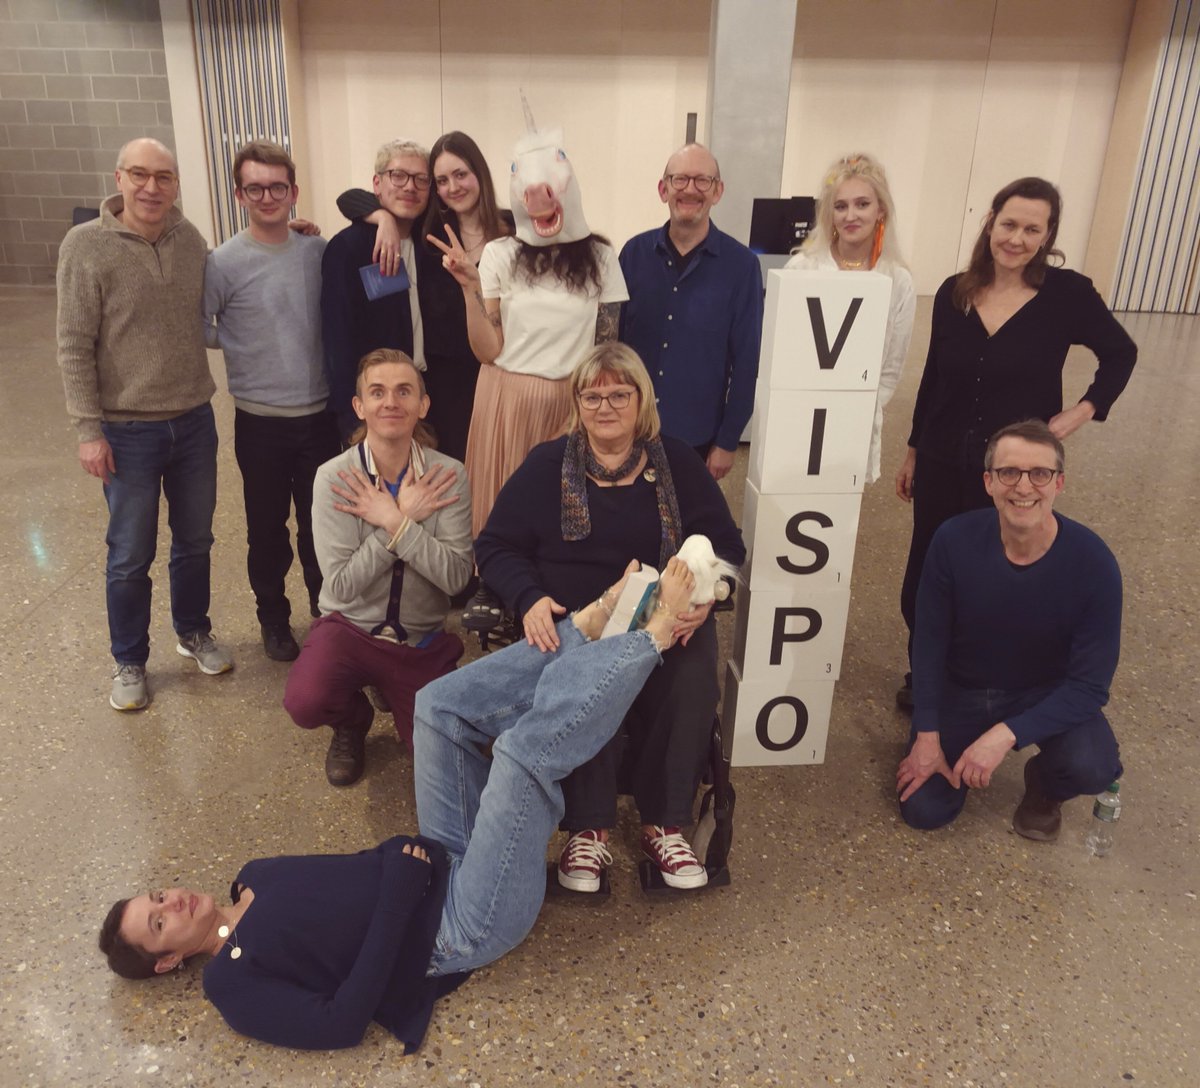 The brilliant poets of our action vispo / student book launch event tonight! Exceptional evening of balloons jenga unicorn eggs sellotape shoes and poetry. @___Stathis___ @AssociateTyz @albanart @vlkaye Julia Rose Lewis, Josh Ciccone, Oscar Rodriguez, Jessica Pritchard et al